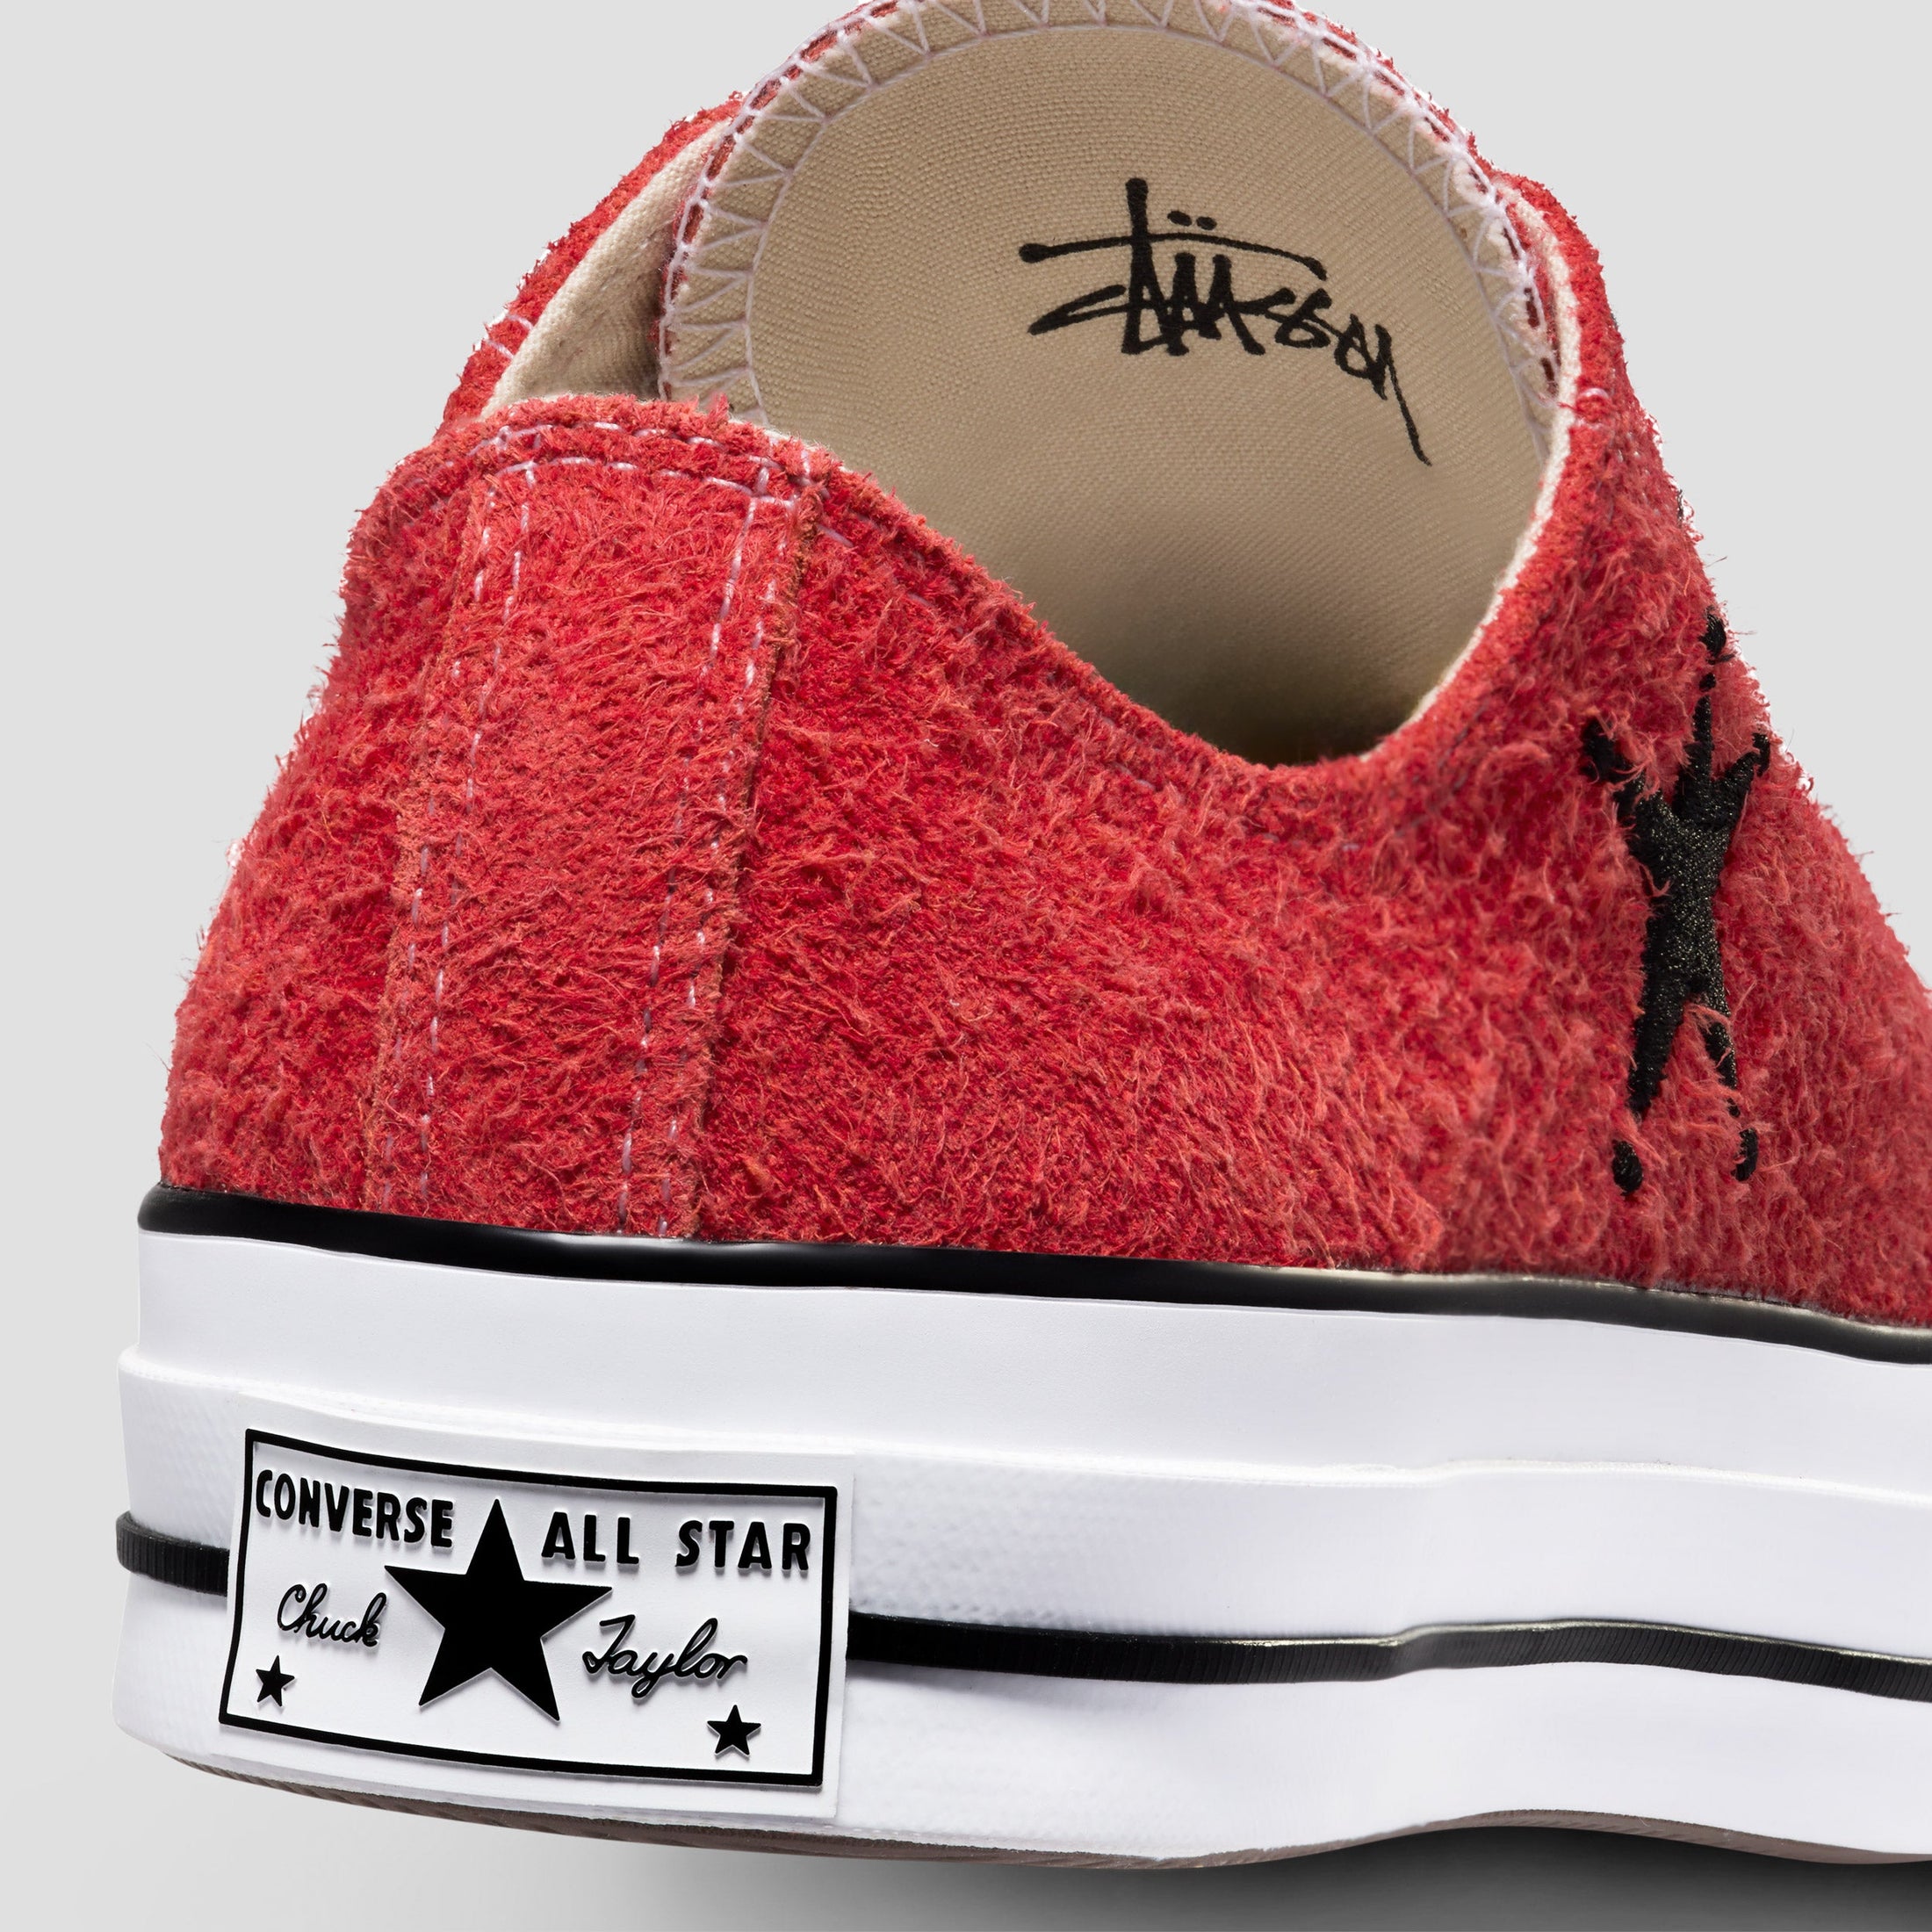 Converse X Stussy Chuck 70 Ox Skate Shoes Poppy Red